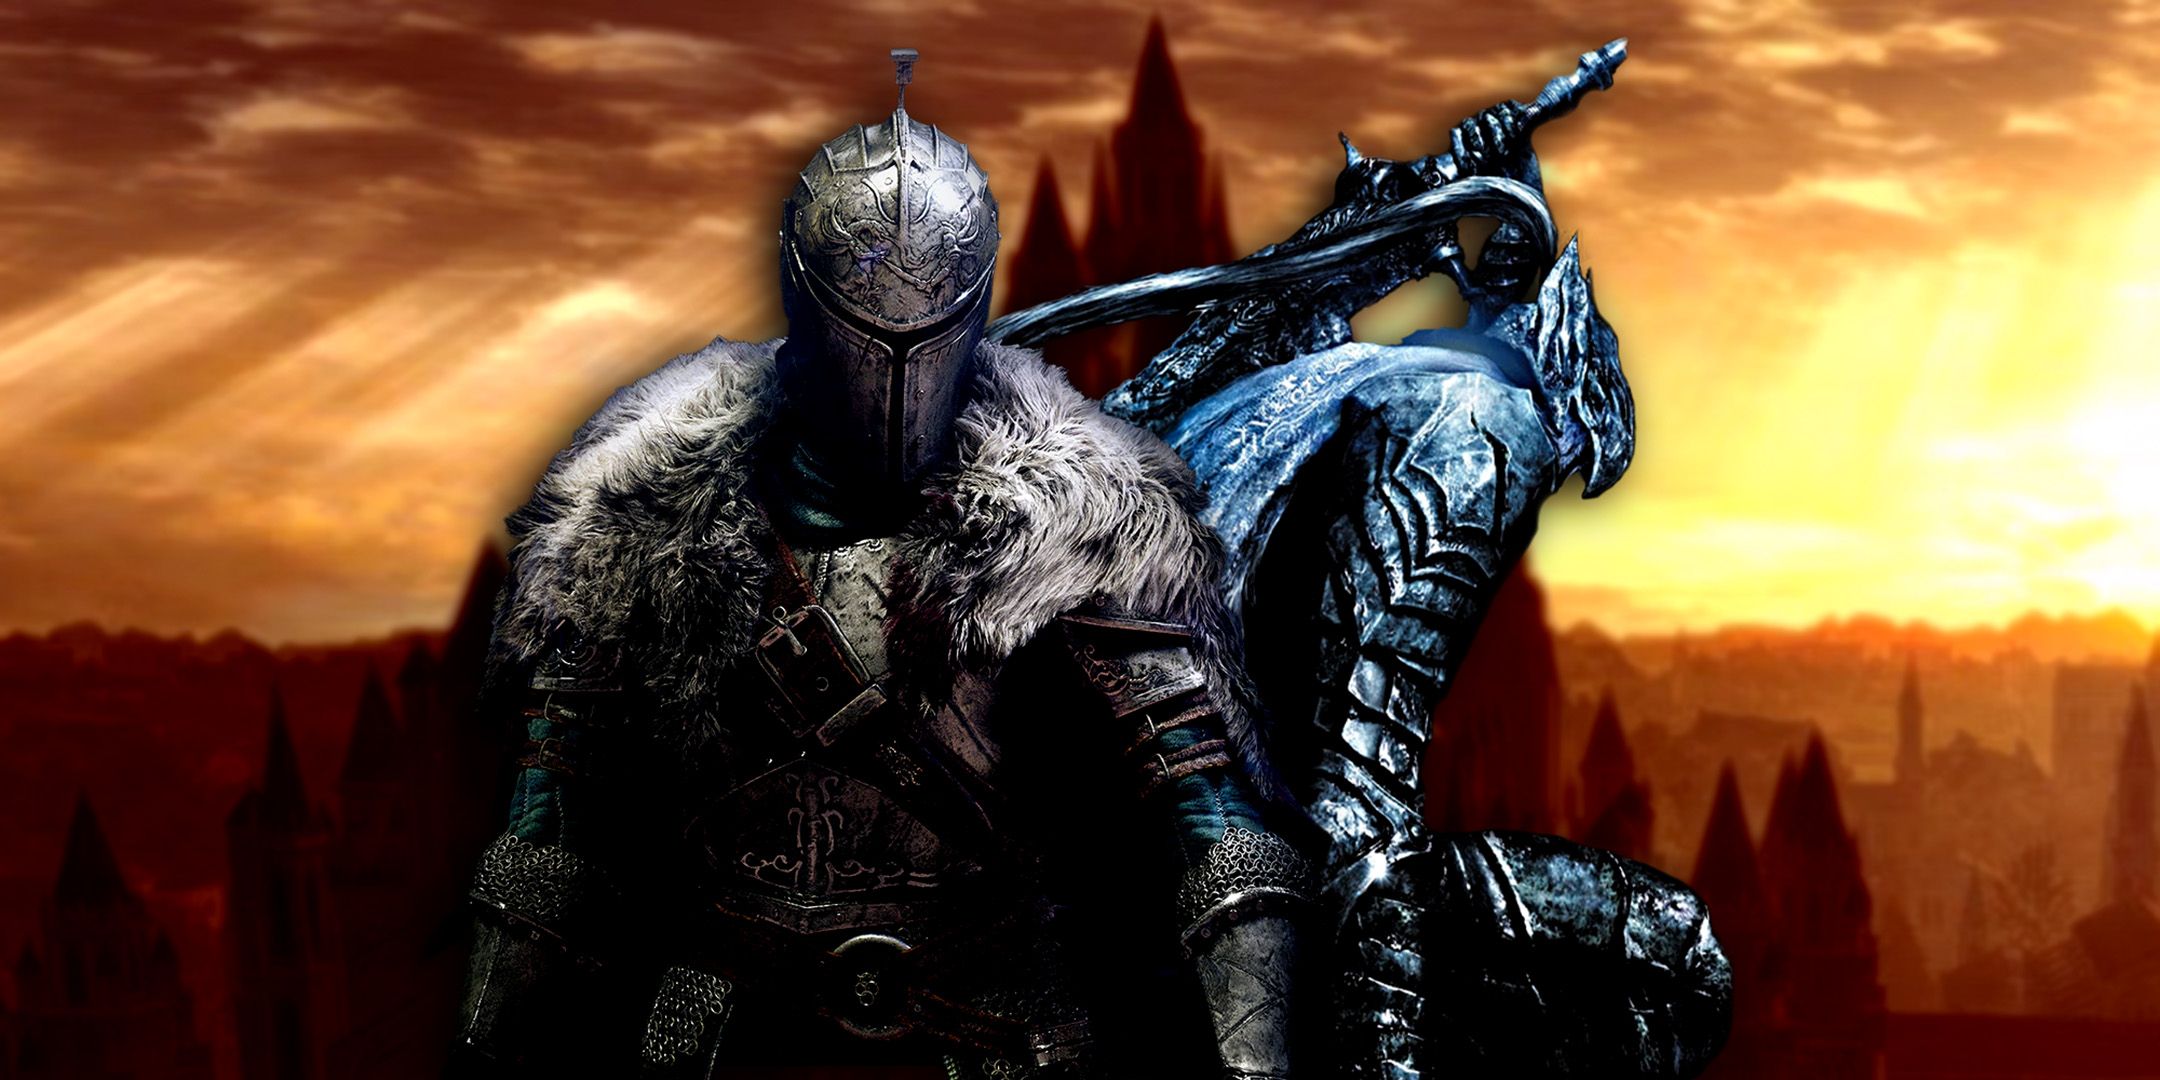 Artorias and warrior from Dark Souls 2 standing next to eachother in Anor Londo